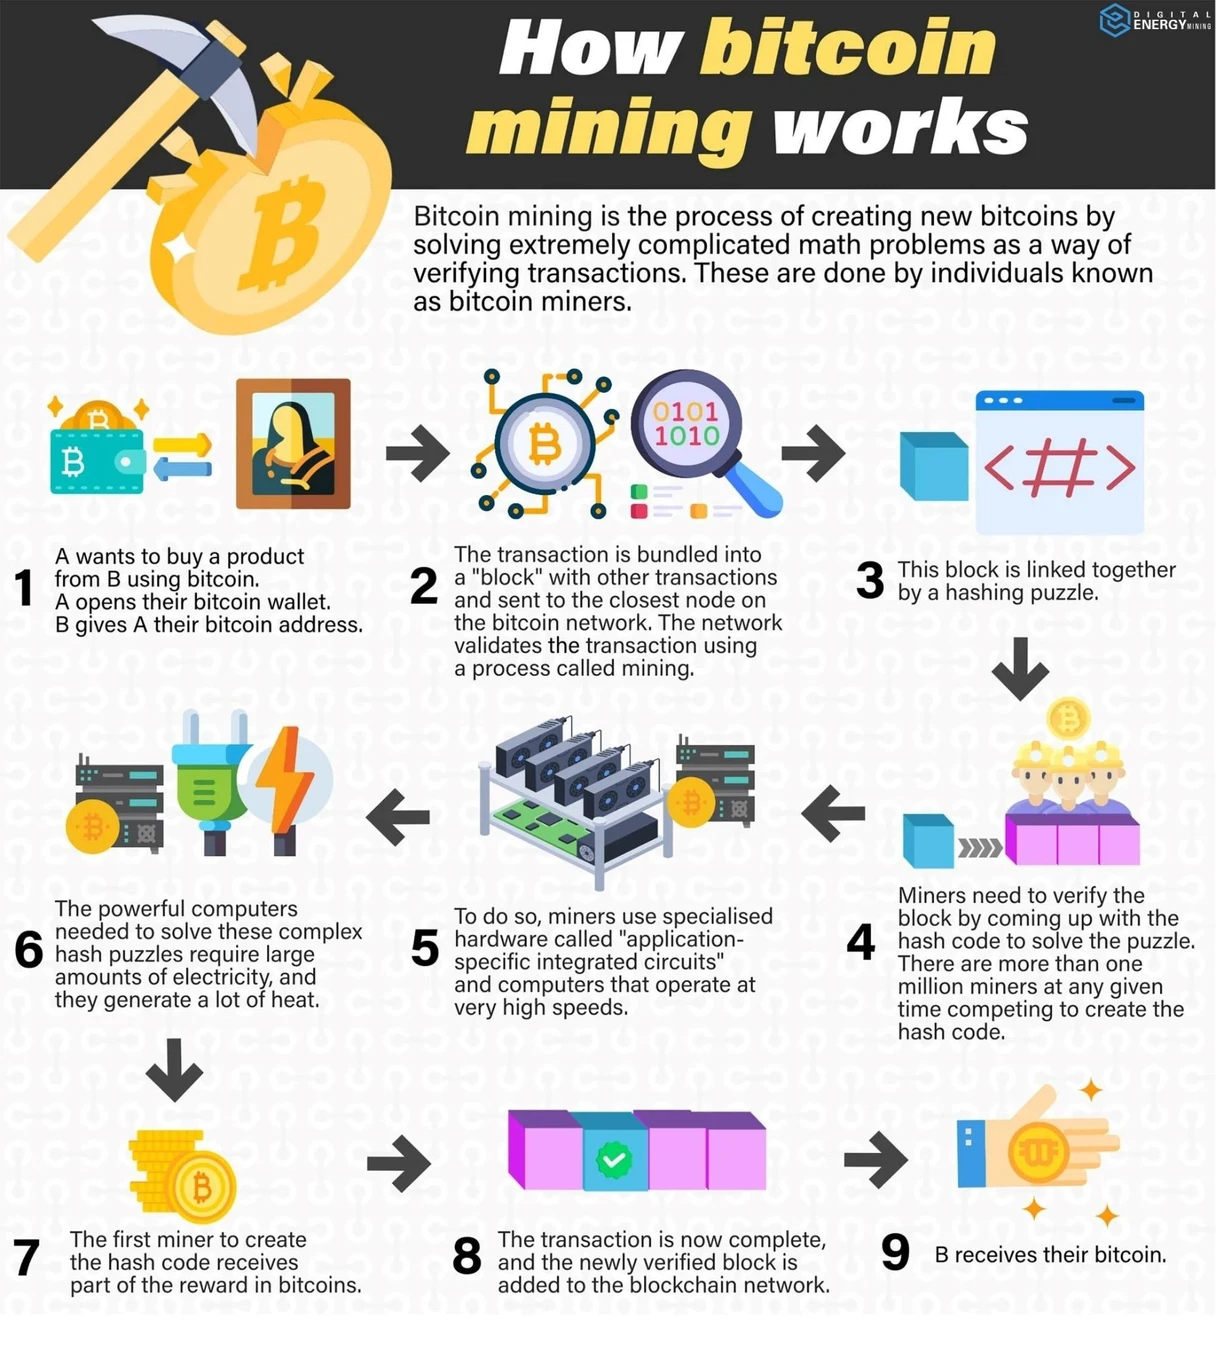 Digital Energy Mining booming in India Bitcoin mining is now “one of the most sustainable industries in the world.”